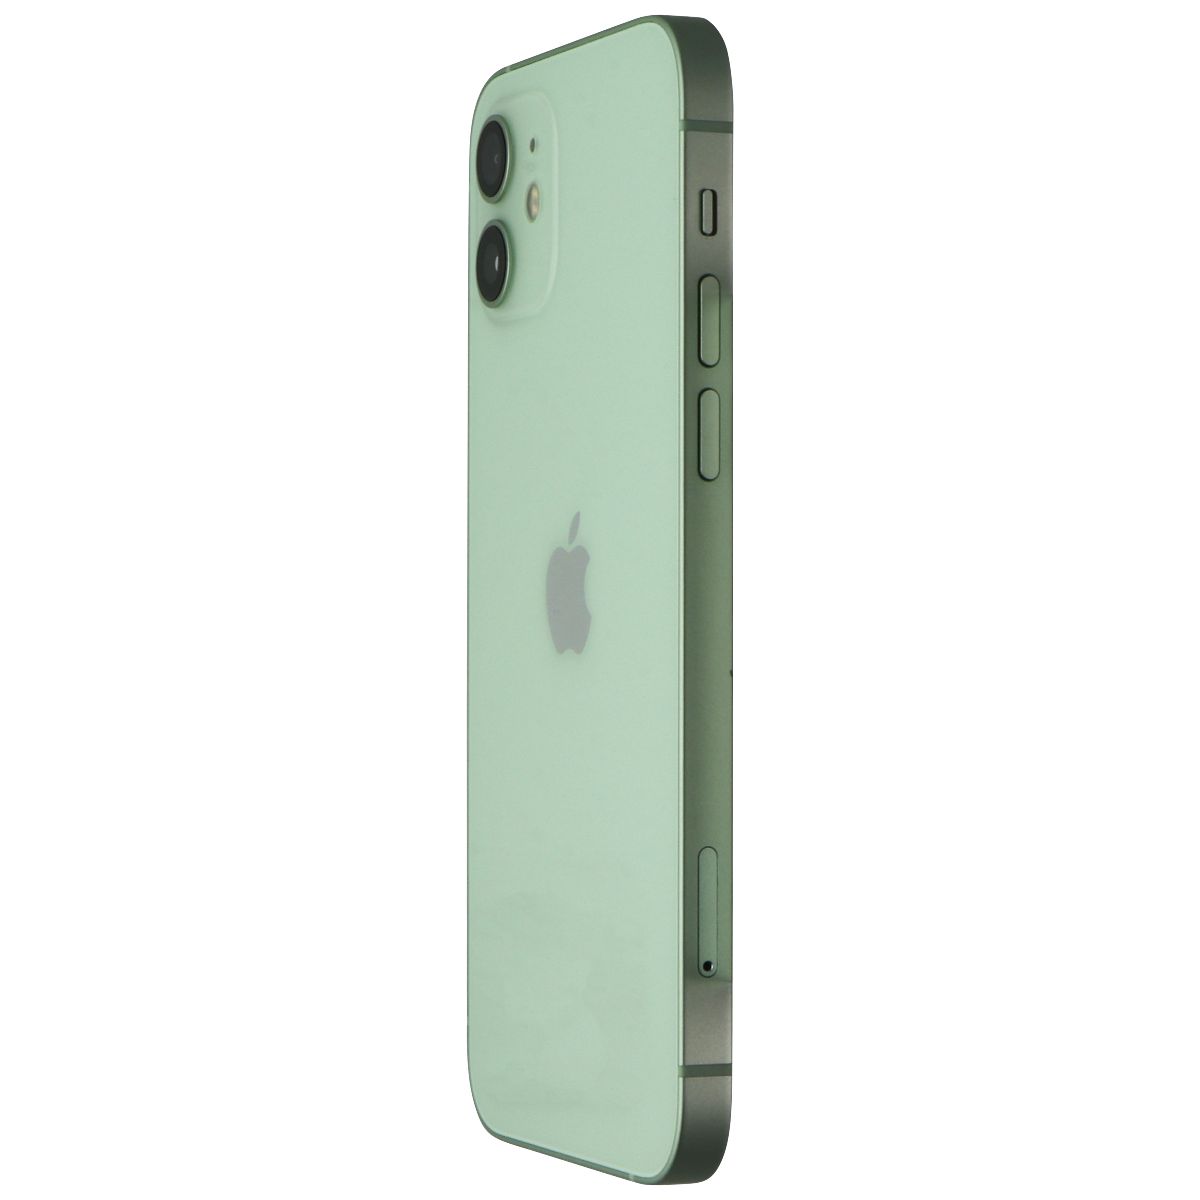 Apple iPhone 12 (6.1-inch) (A2172) Verizon & T-Mobile Only - 64GB / Green Cell Phones & Smartphones Apple    - Simple Cell Bulk Wholesale Pricing - USA Seller